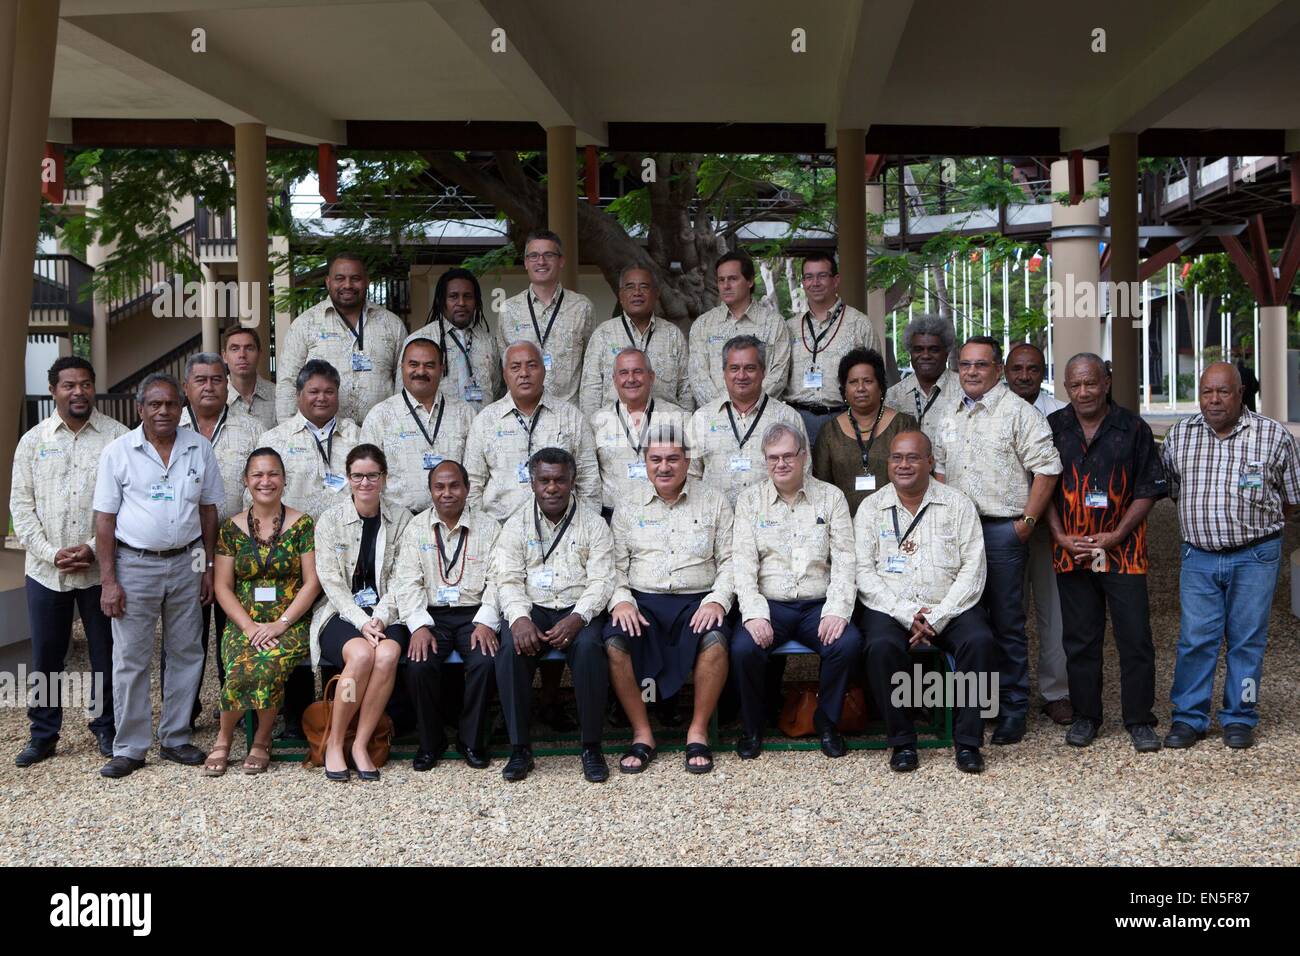 Noumea, New Caledonia. 28th April, 2015. Oceania 21, Meetings, third edition of the Oceanian summit on sustainable development, representatives of 17 South Pacific countries, 28, 29 and 30 April, climate change, roundable in the wake of Cyclone PAM in the Pacific, (center from left nr.6) Vanuatu climate change Minister James Bule Credit:  Ania Freindorf/Alamy Live News Stock Photo